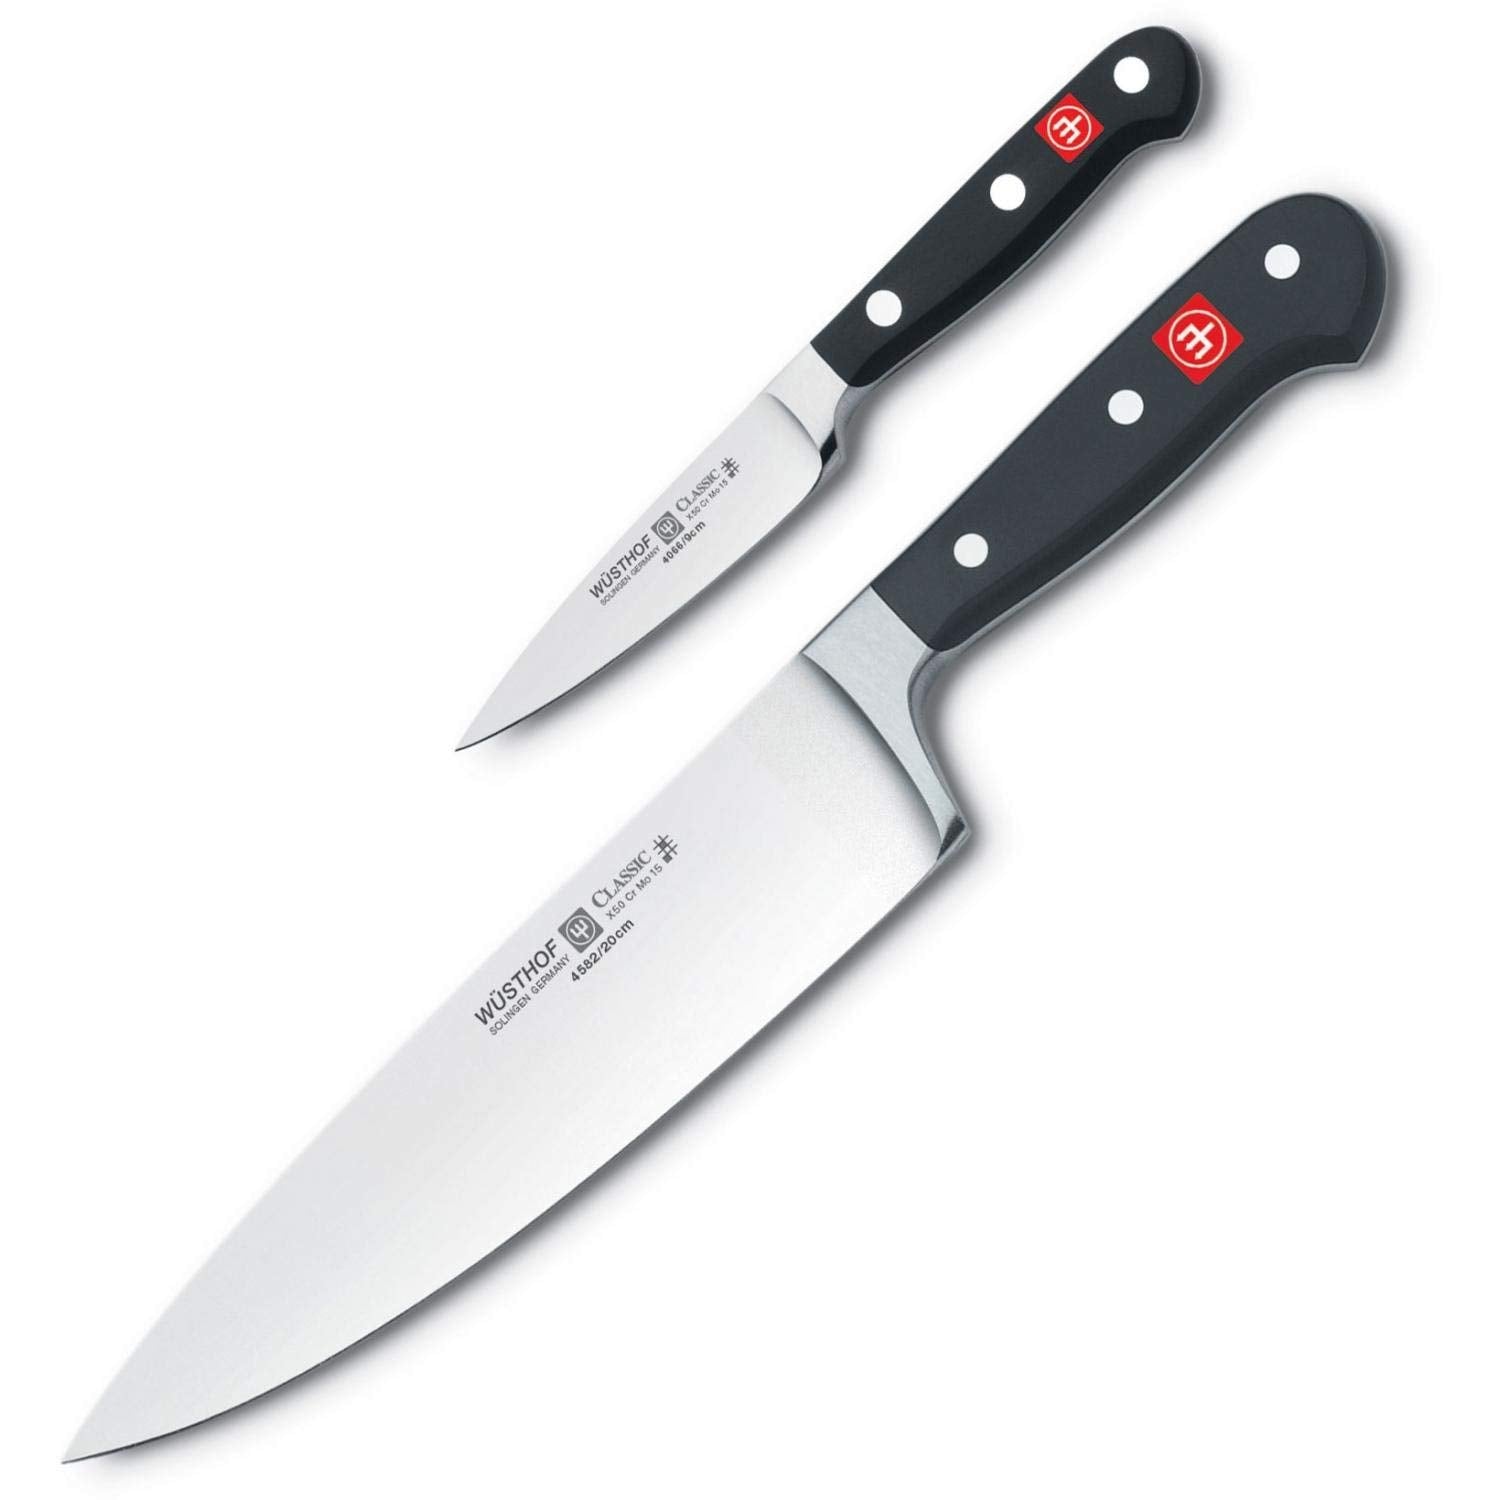 Wüsthof - Two Piece Starter Set - 3.5" Pairing Knife and 8" Cooks Knife (9755)